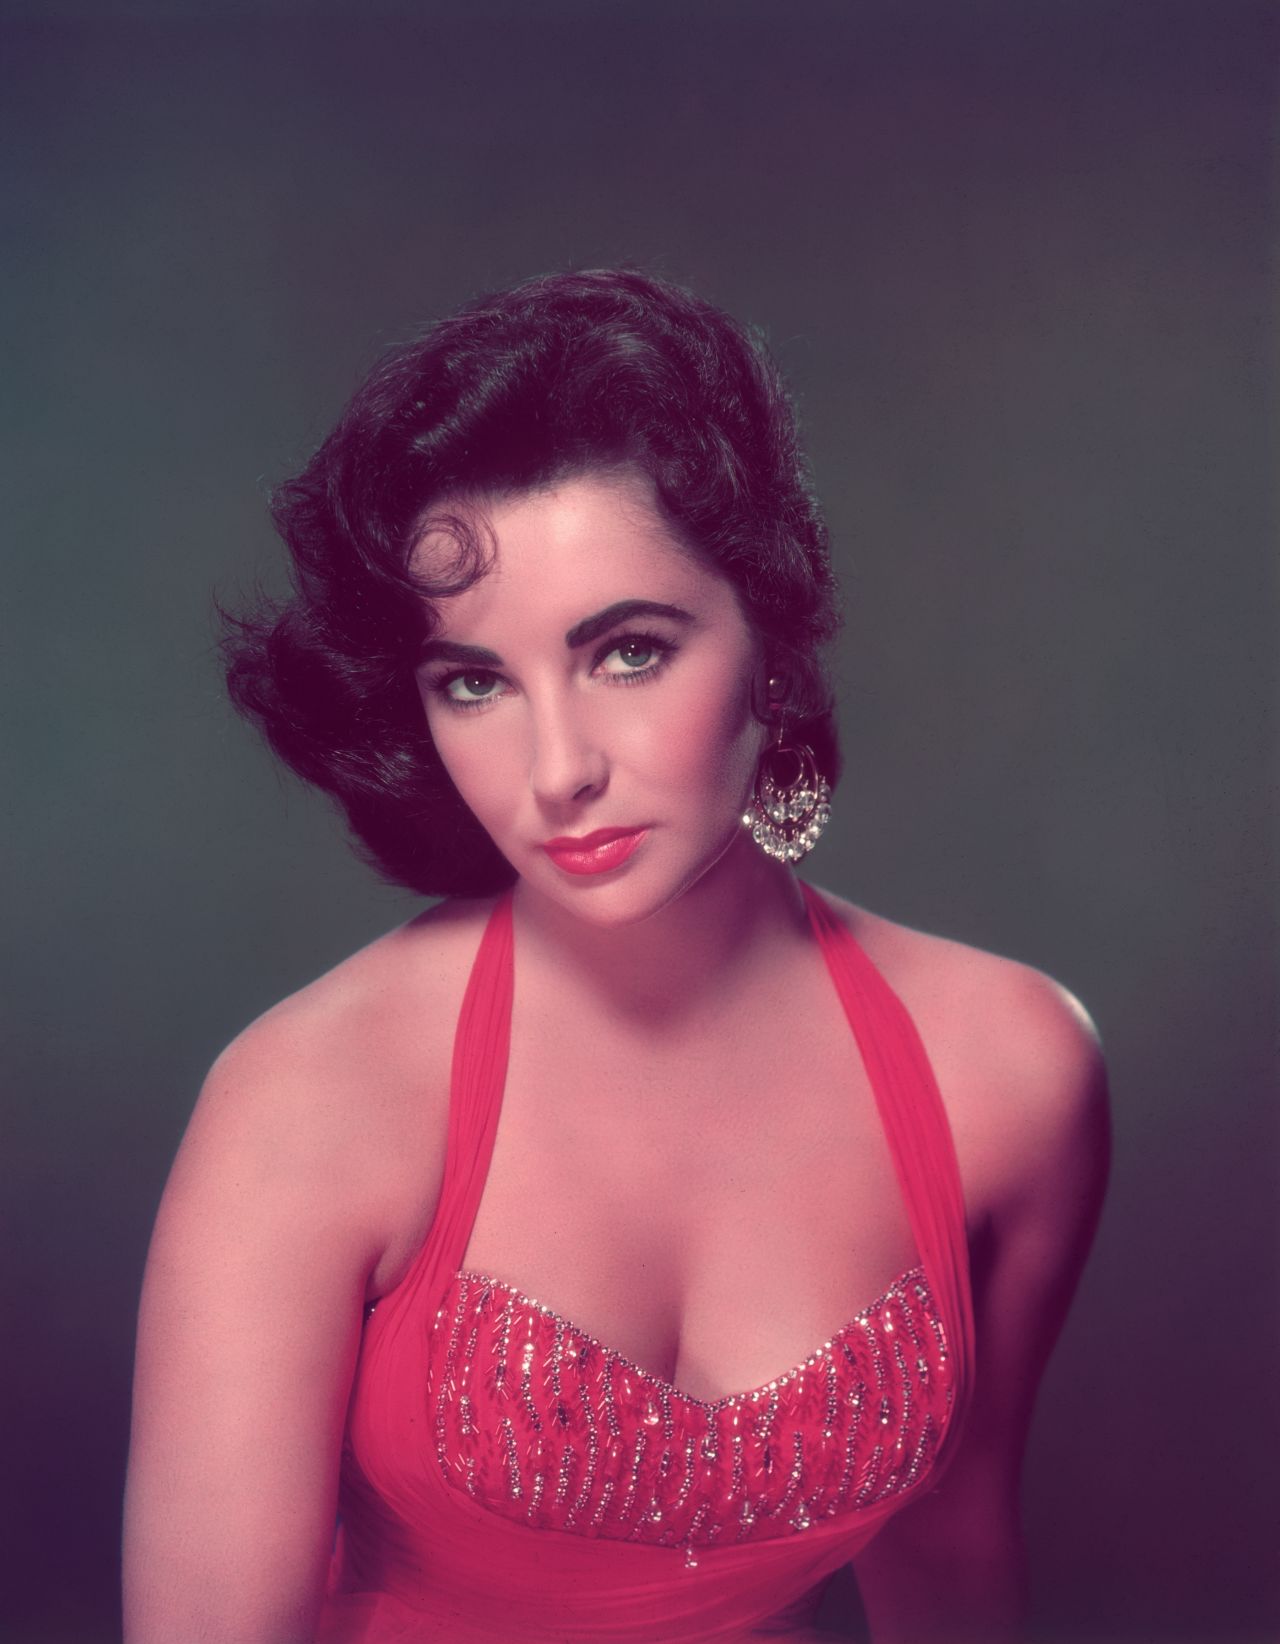 Regarded as one of the world's most legendary actresses, Elizabeth Taylor died March 23 after being hospitalized for six weeks with congestive heart failure. The two-time Oscar winner was known for her iconic movies, much-admired beauty and charitable acts. She was 79.  <a href="http://articles.cnn.com/2011-03-23/entertainment/obit.elizabeth.taylor_1_elizabeth-taylor-aids-foundation-charity-work-raintree-county?_s=PM:SHOWBIZ">Full story</a>